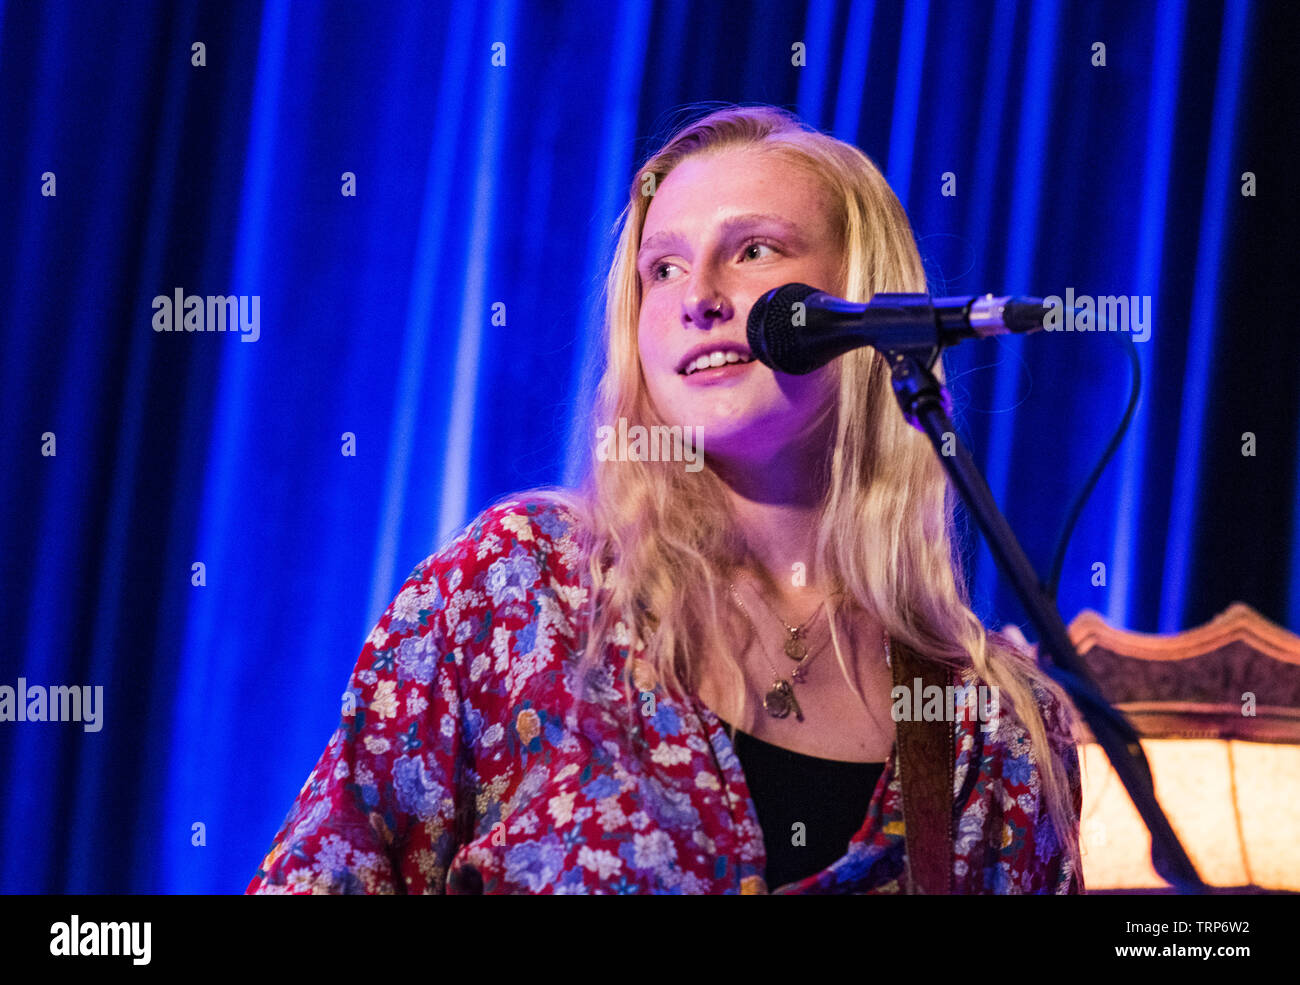 New phenomenon folk singer Billie Marten, performing an intimate homecoming live gig with her band at The Club in Harrogate, North Yorkshire, England, UK Stock Photo